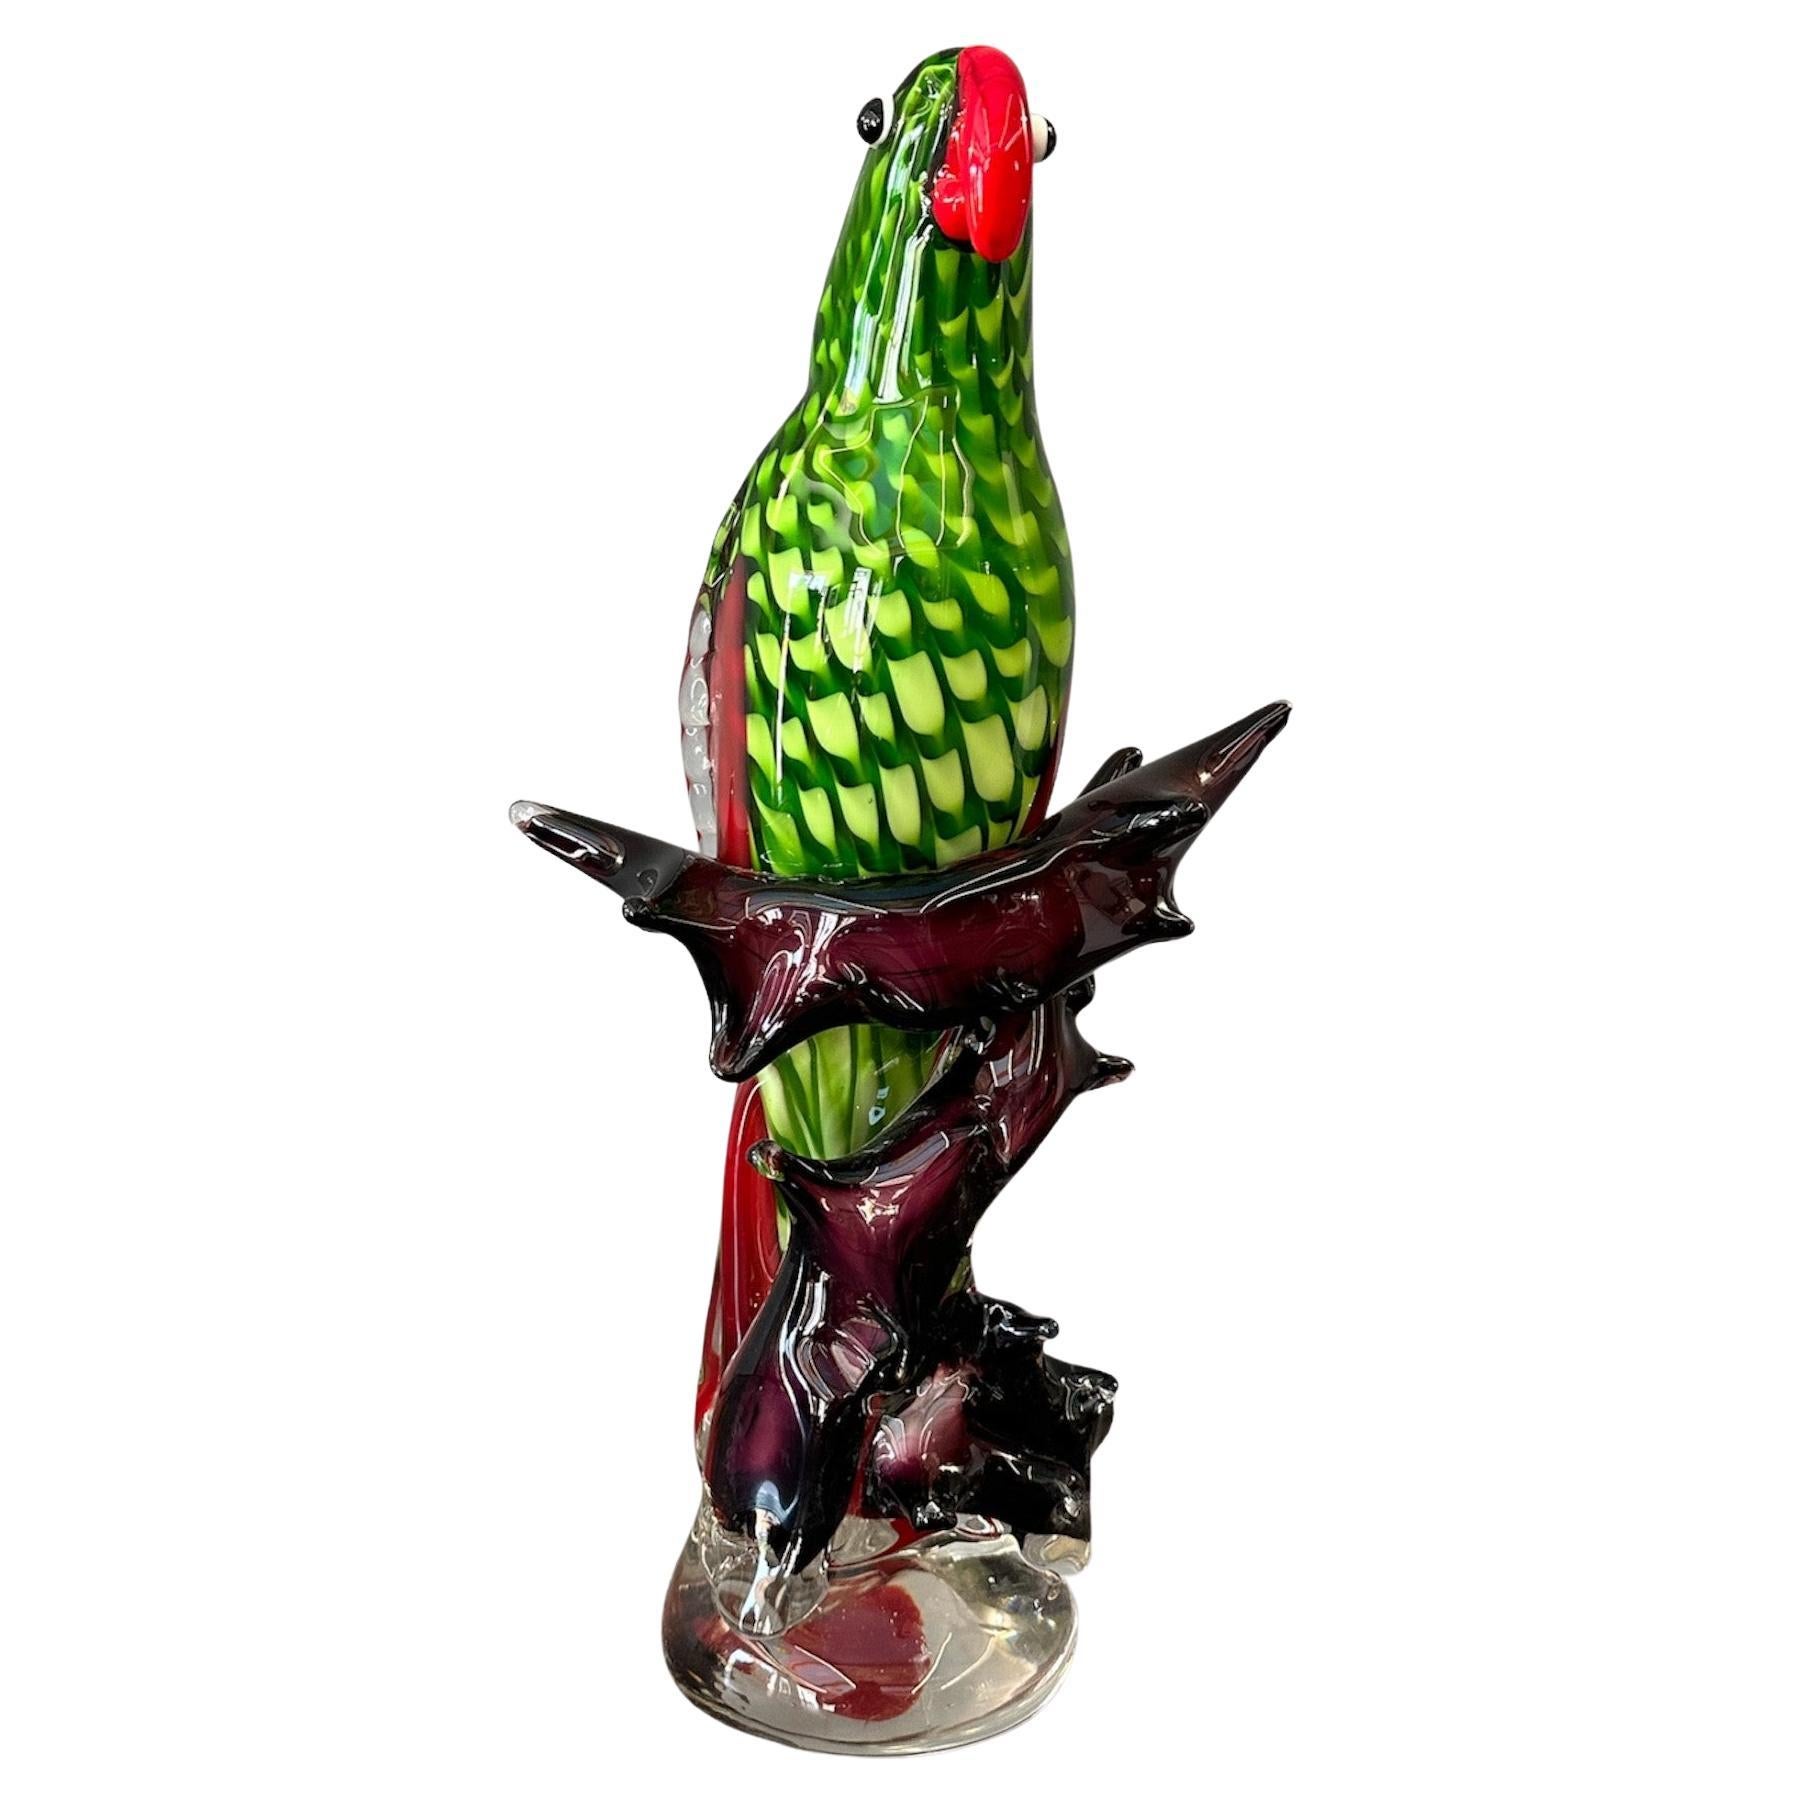 1970s, Murano glass sculpture, Parrot For Sale